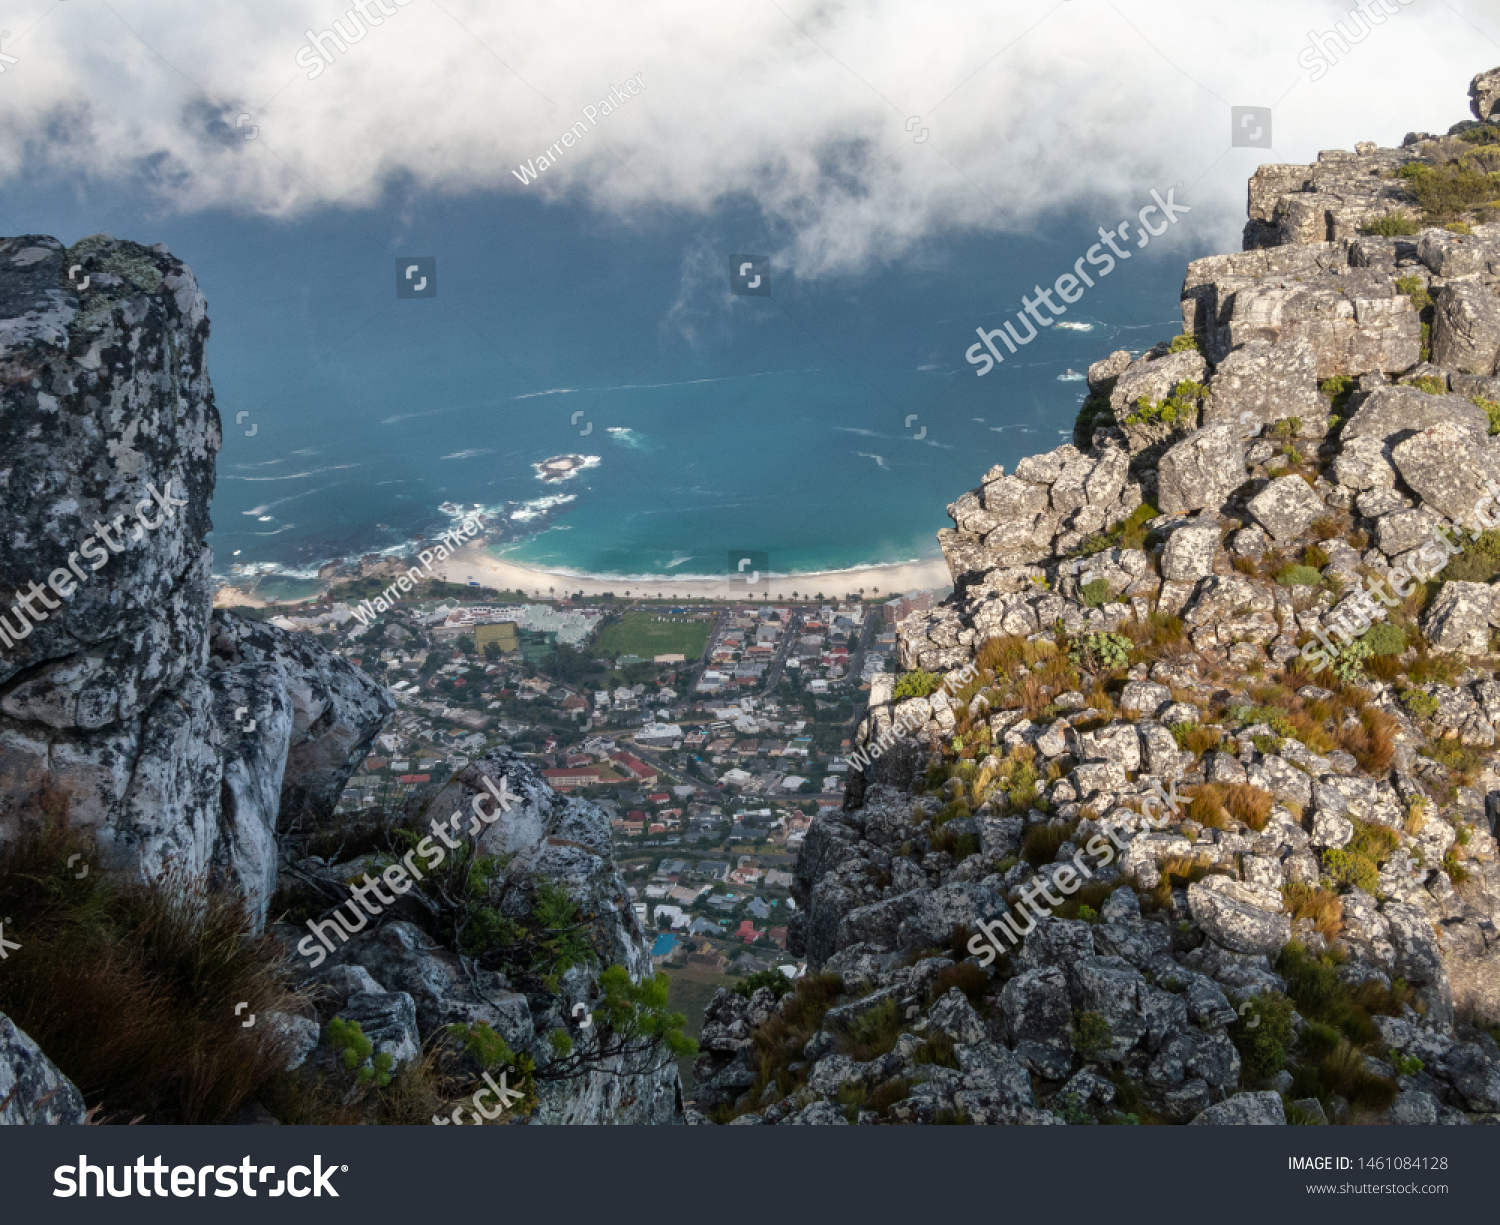 Camps Bay view from Table Mountain #1461084128